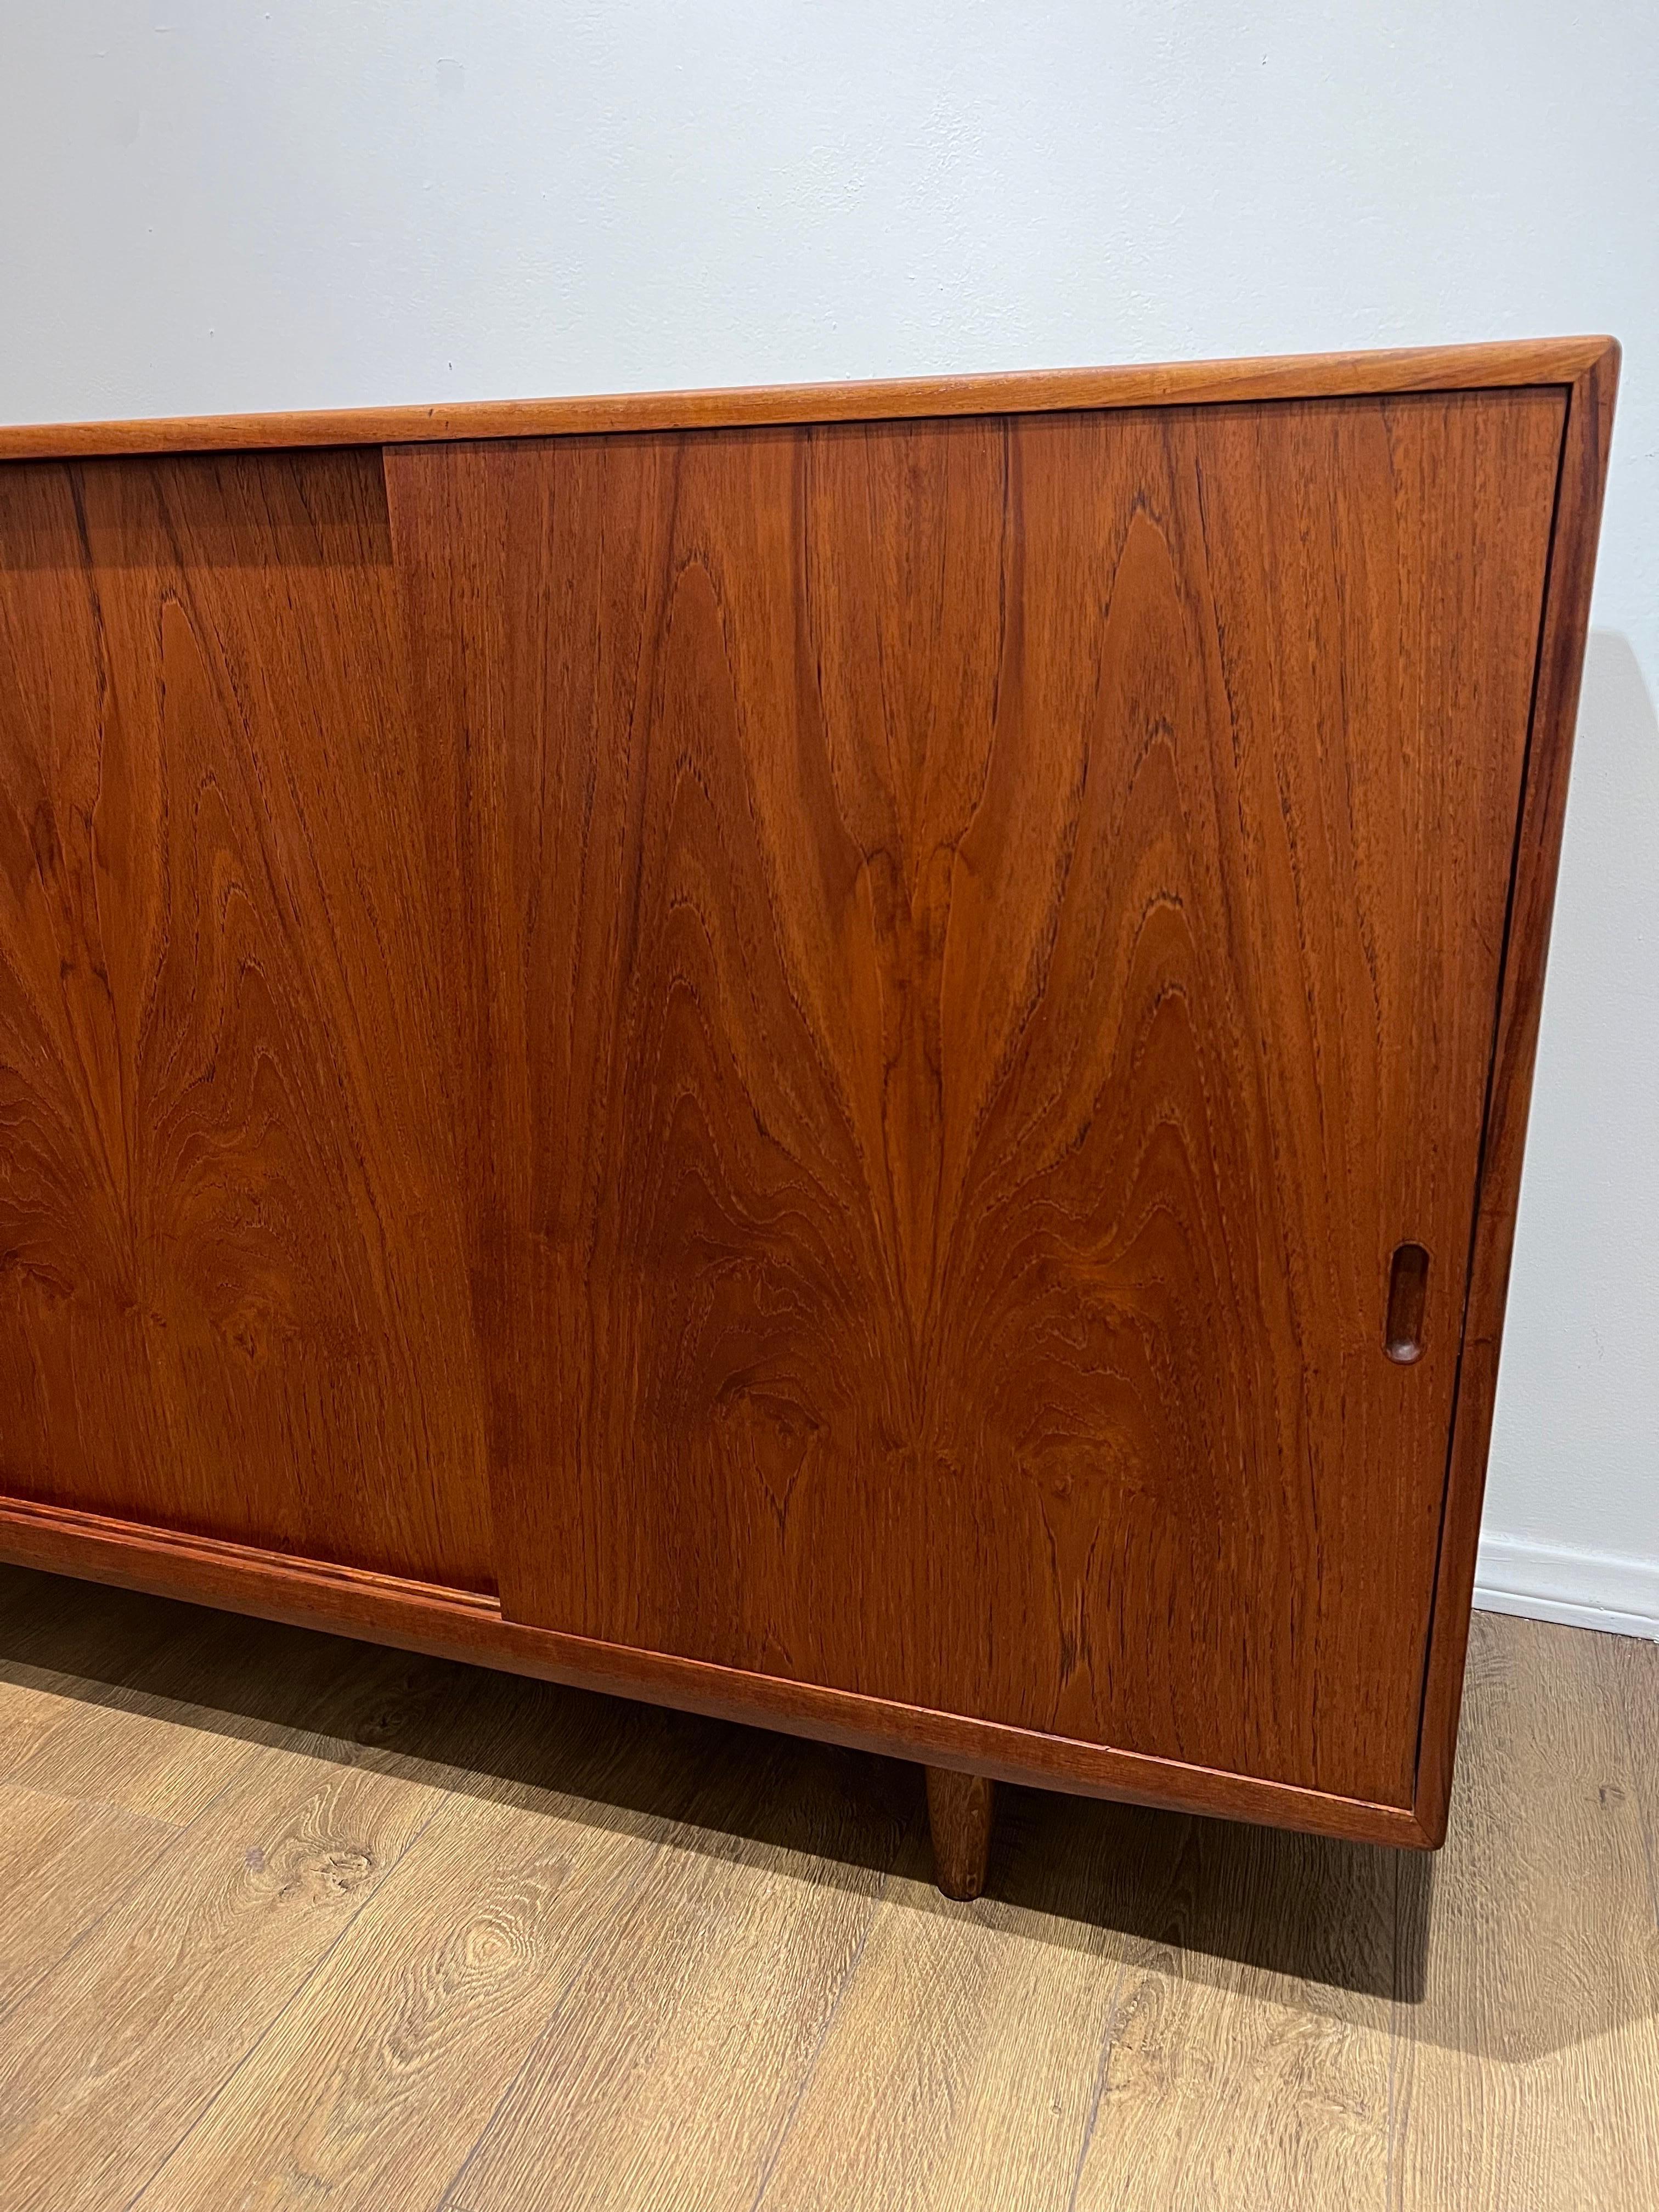 Danish Modern Massive Large Teak Credenza  In Excellent Condition For Sale In San Diego, CA